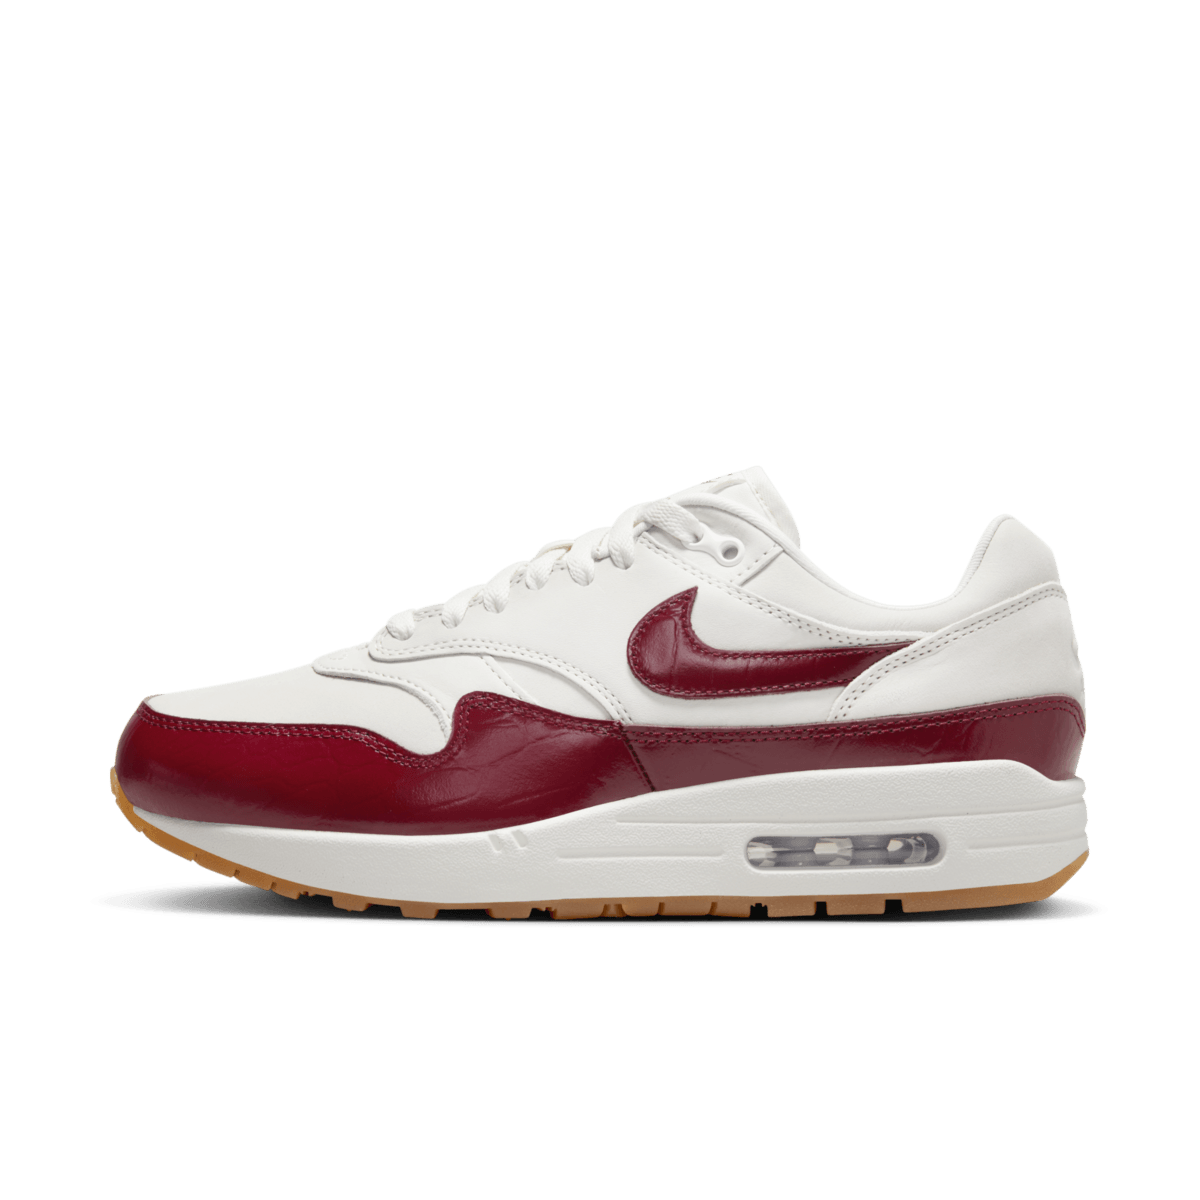 Nike Air Max 1 LX 'Team Red Leather'